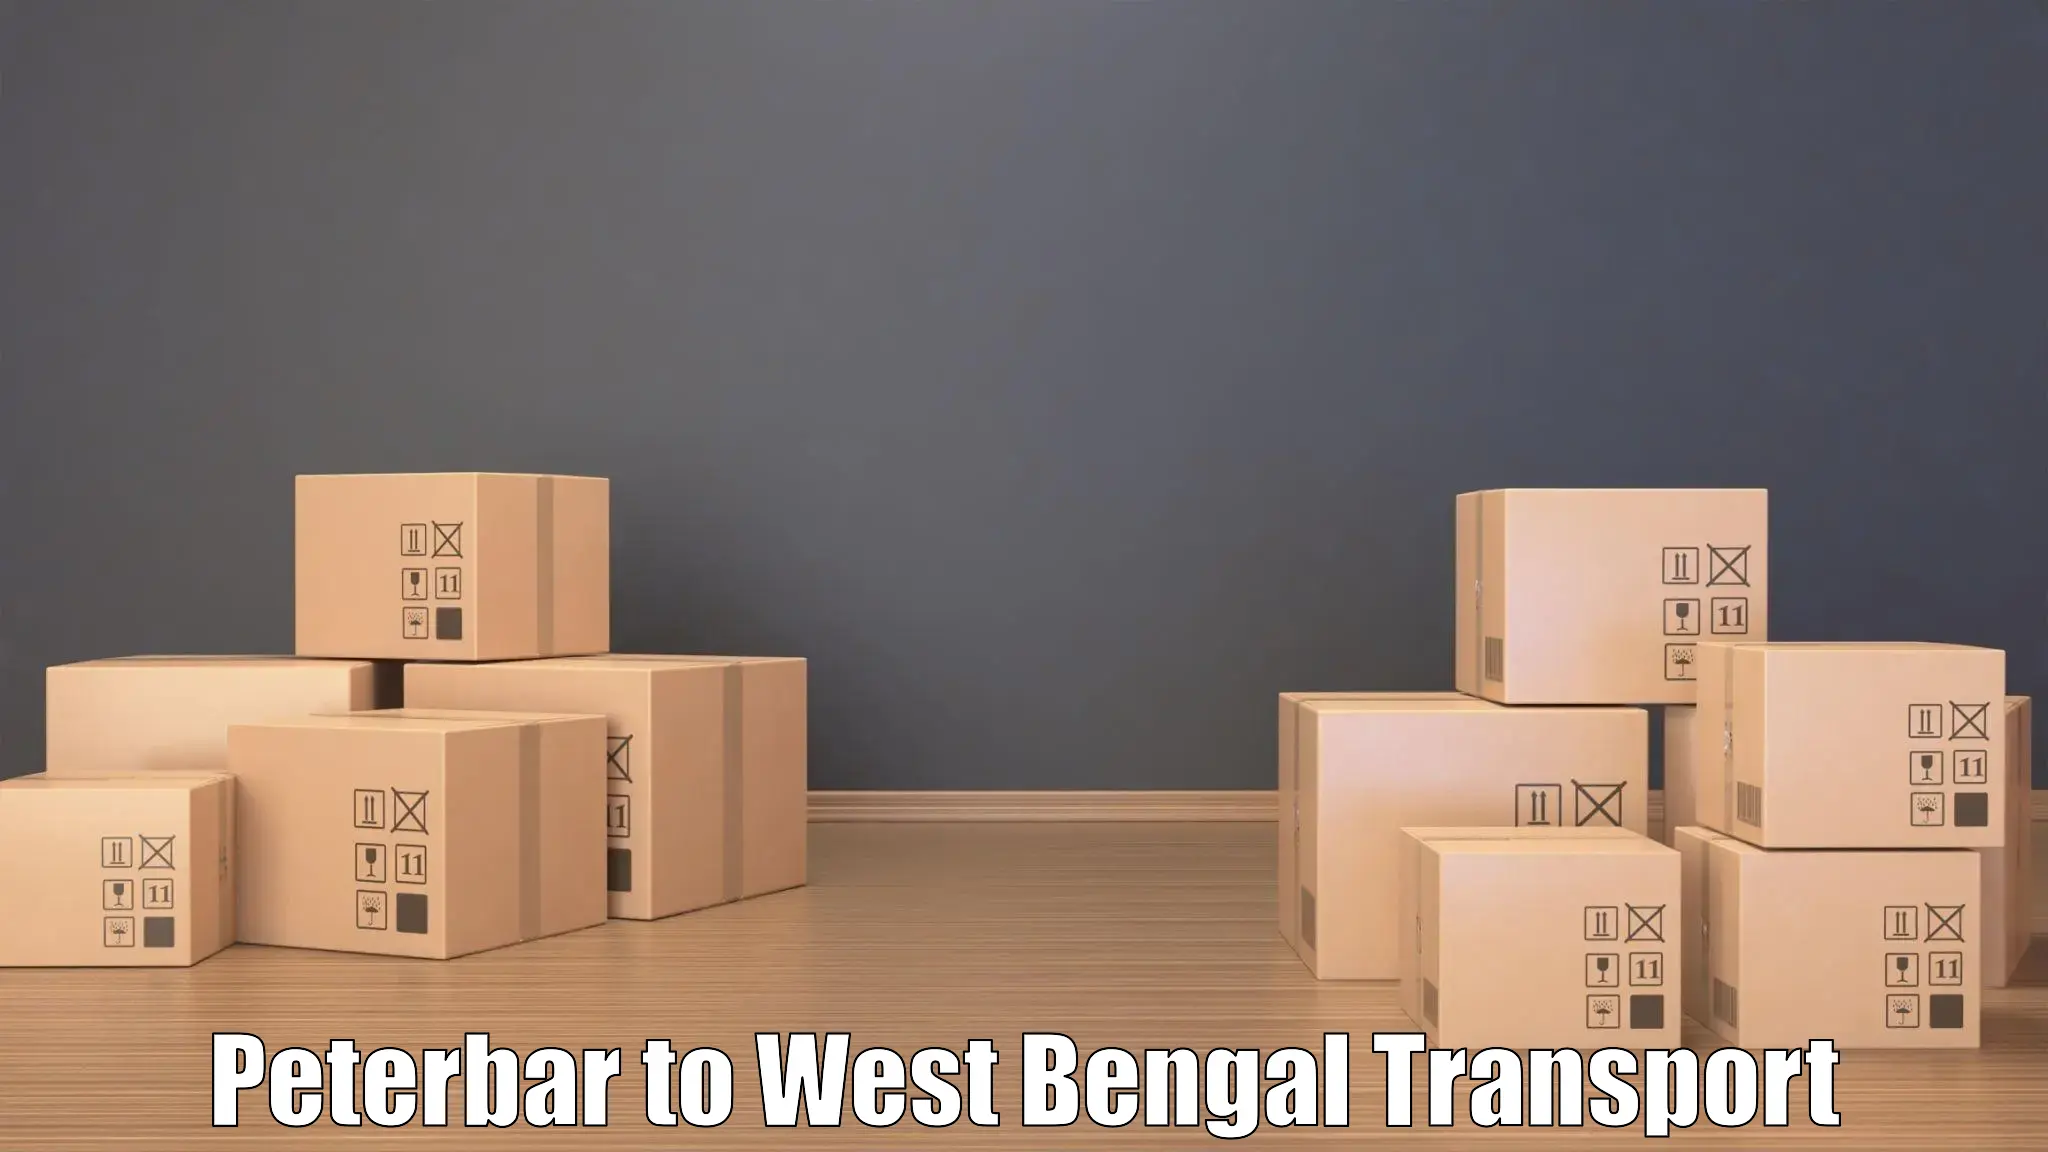 Truck transport companies in India Peterbar to West Bengal